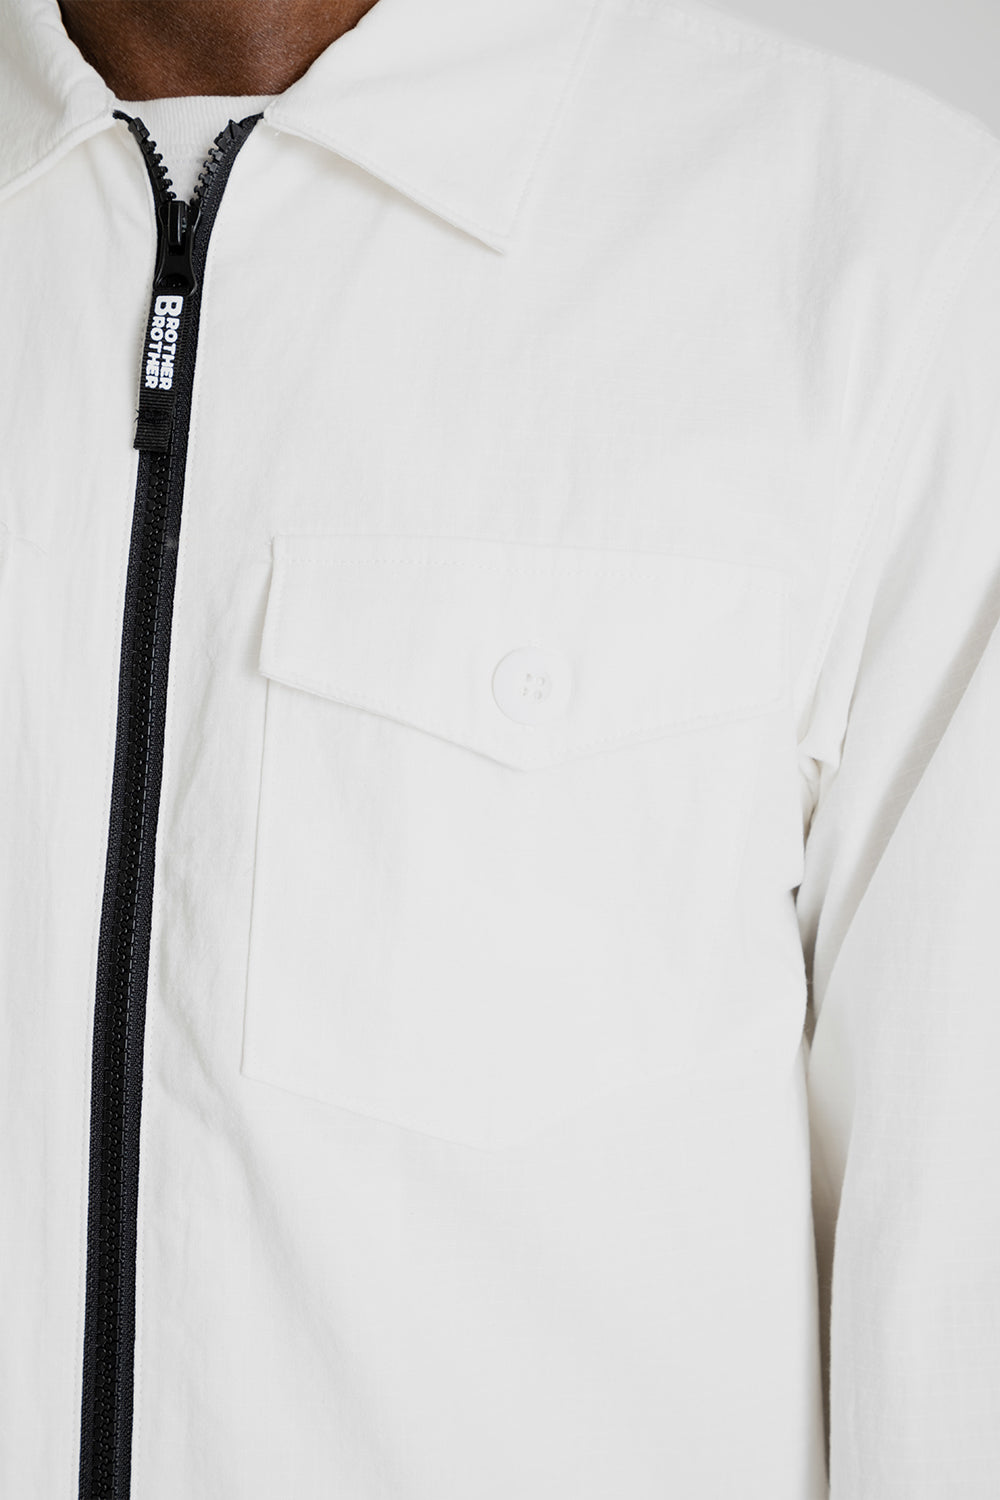 Brother Brother Ripstop Military Zip LS Shirt White Detail 02